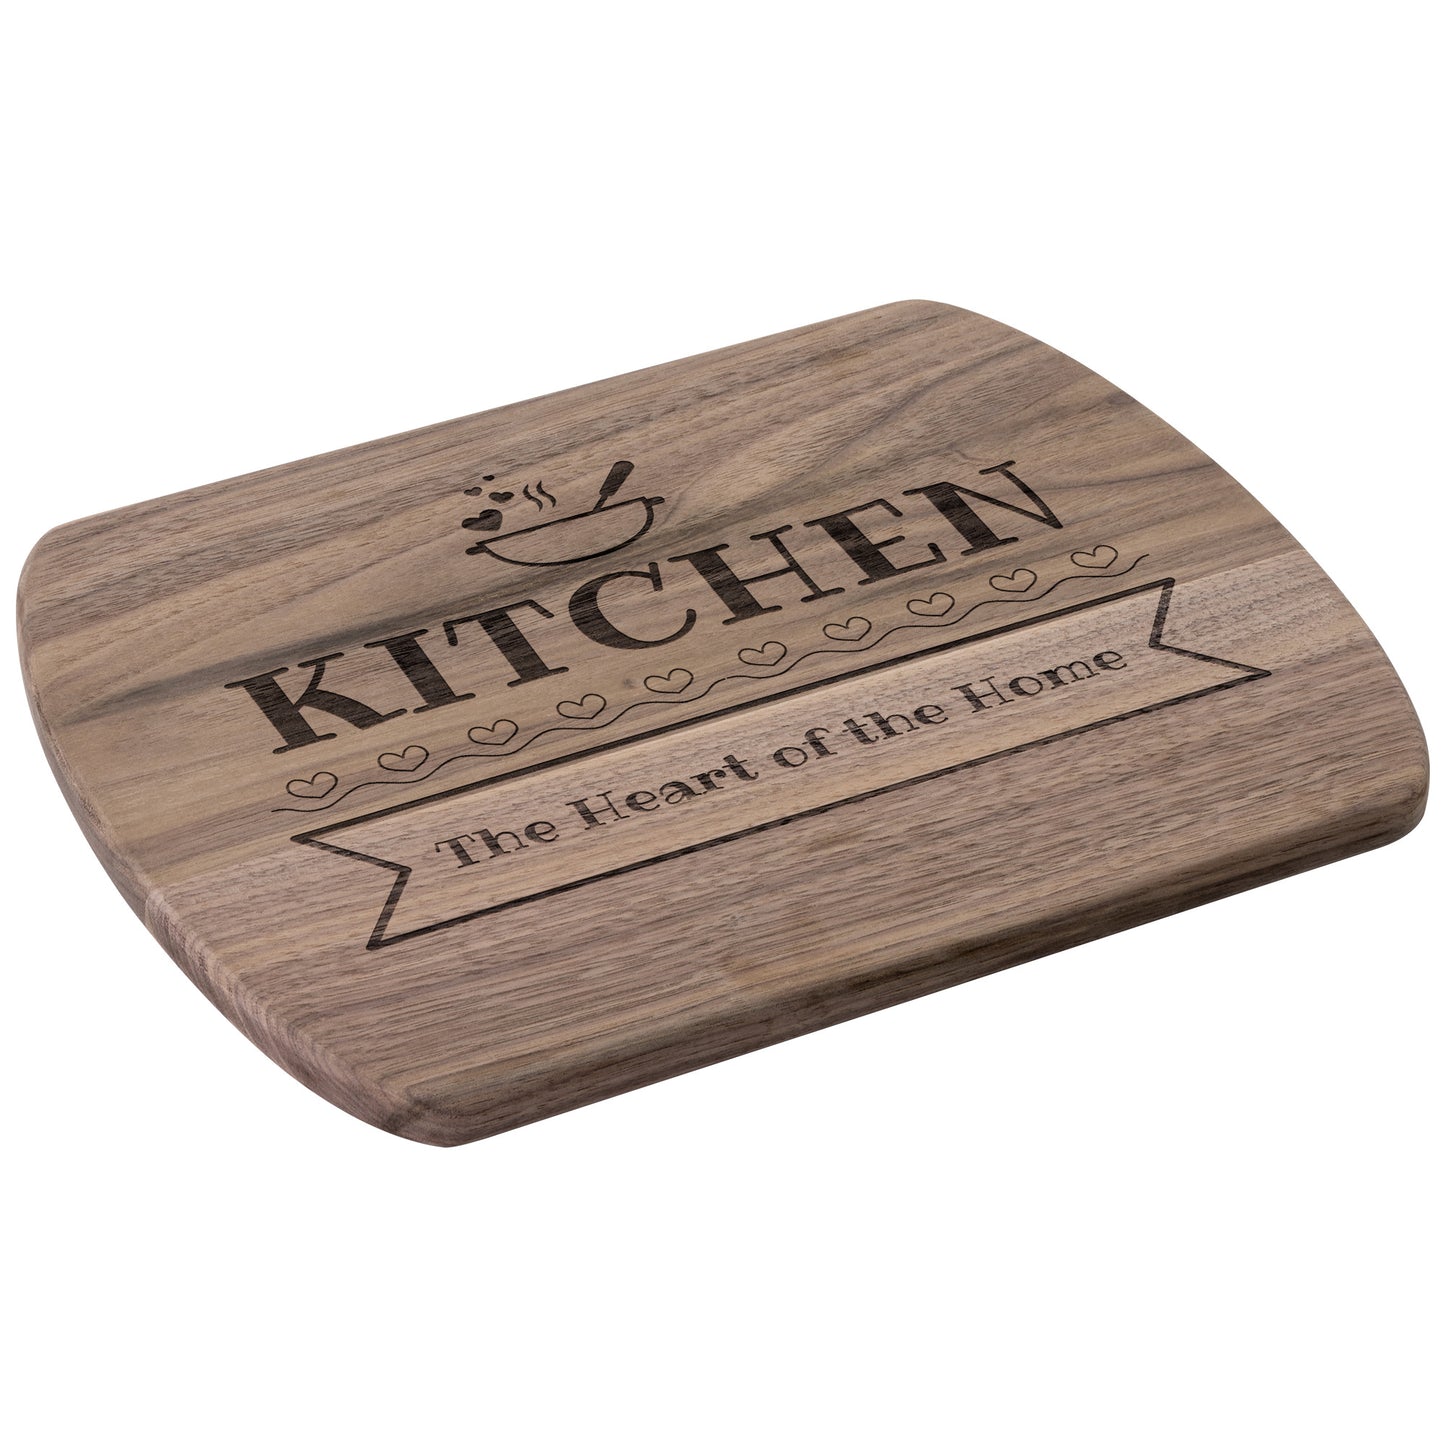 Cutting Board - Kitchen Heart of the Home